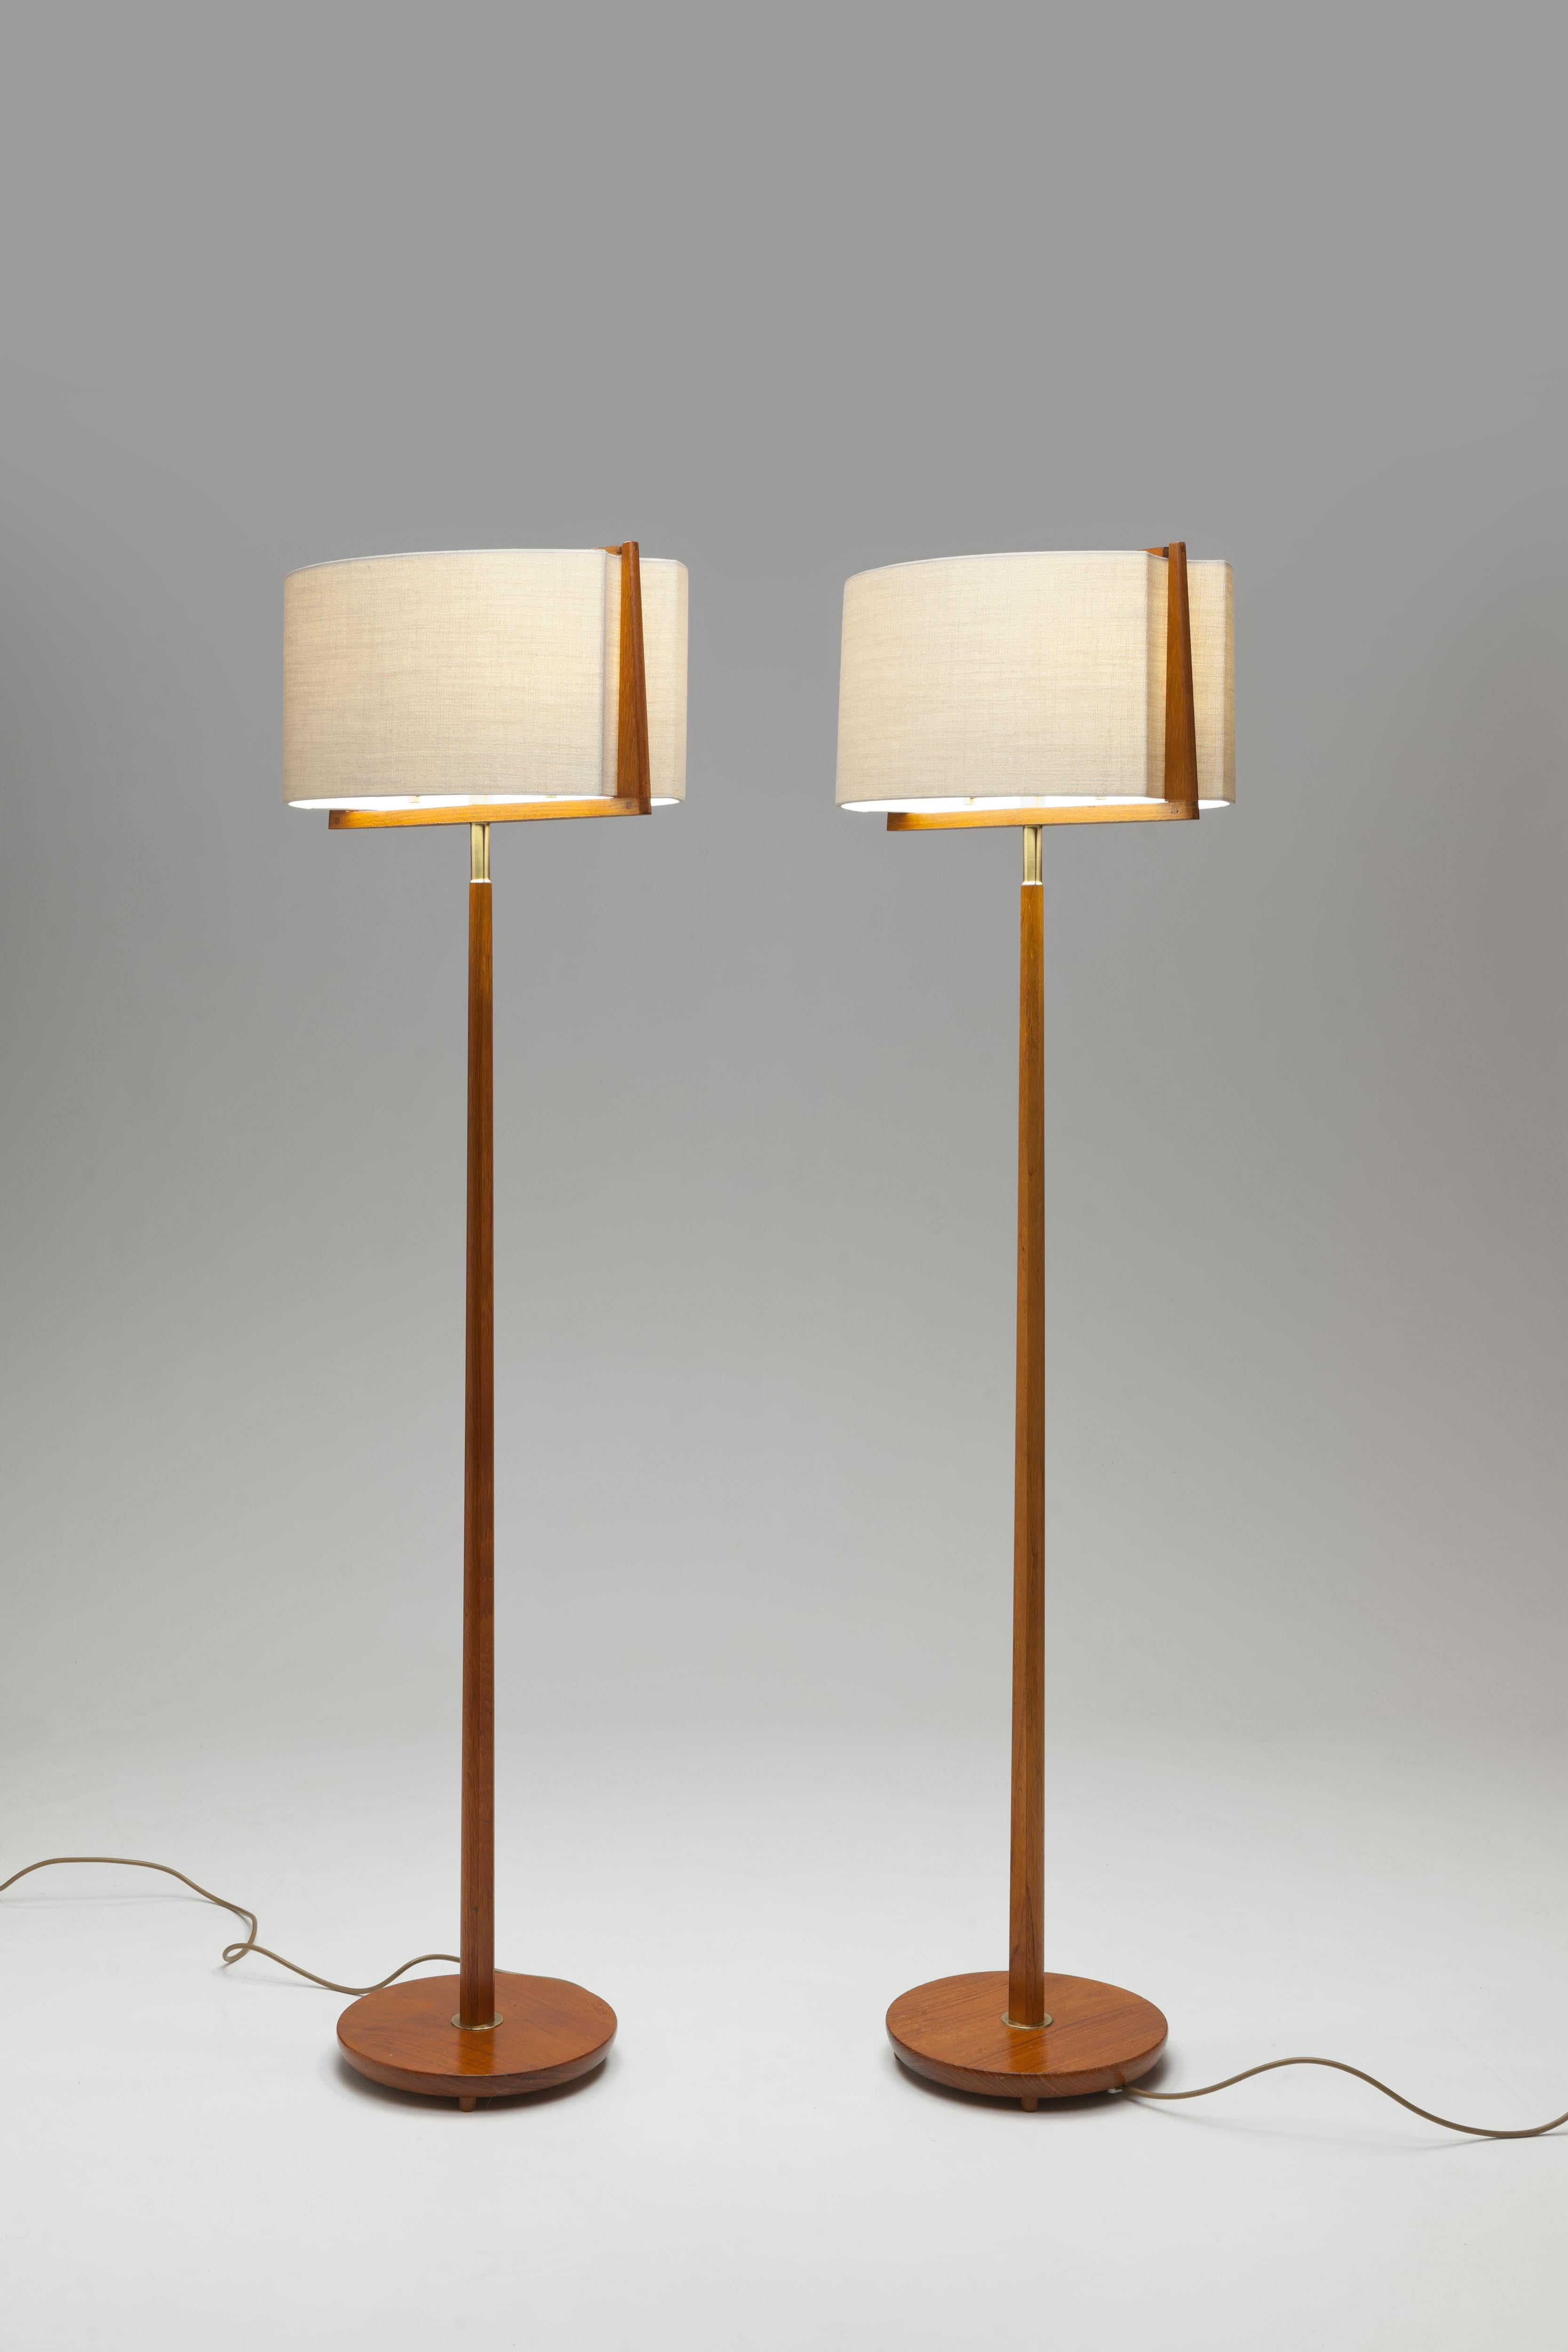 Mid-20th Century Pair of Teak & Brass Swedish Modern Floor Lamps with Unique Shades in Frame